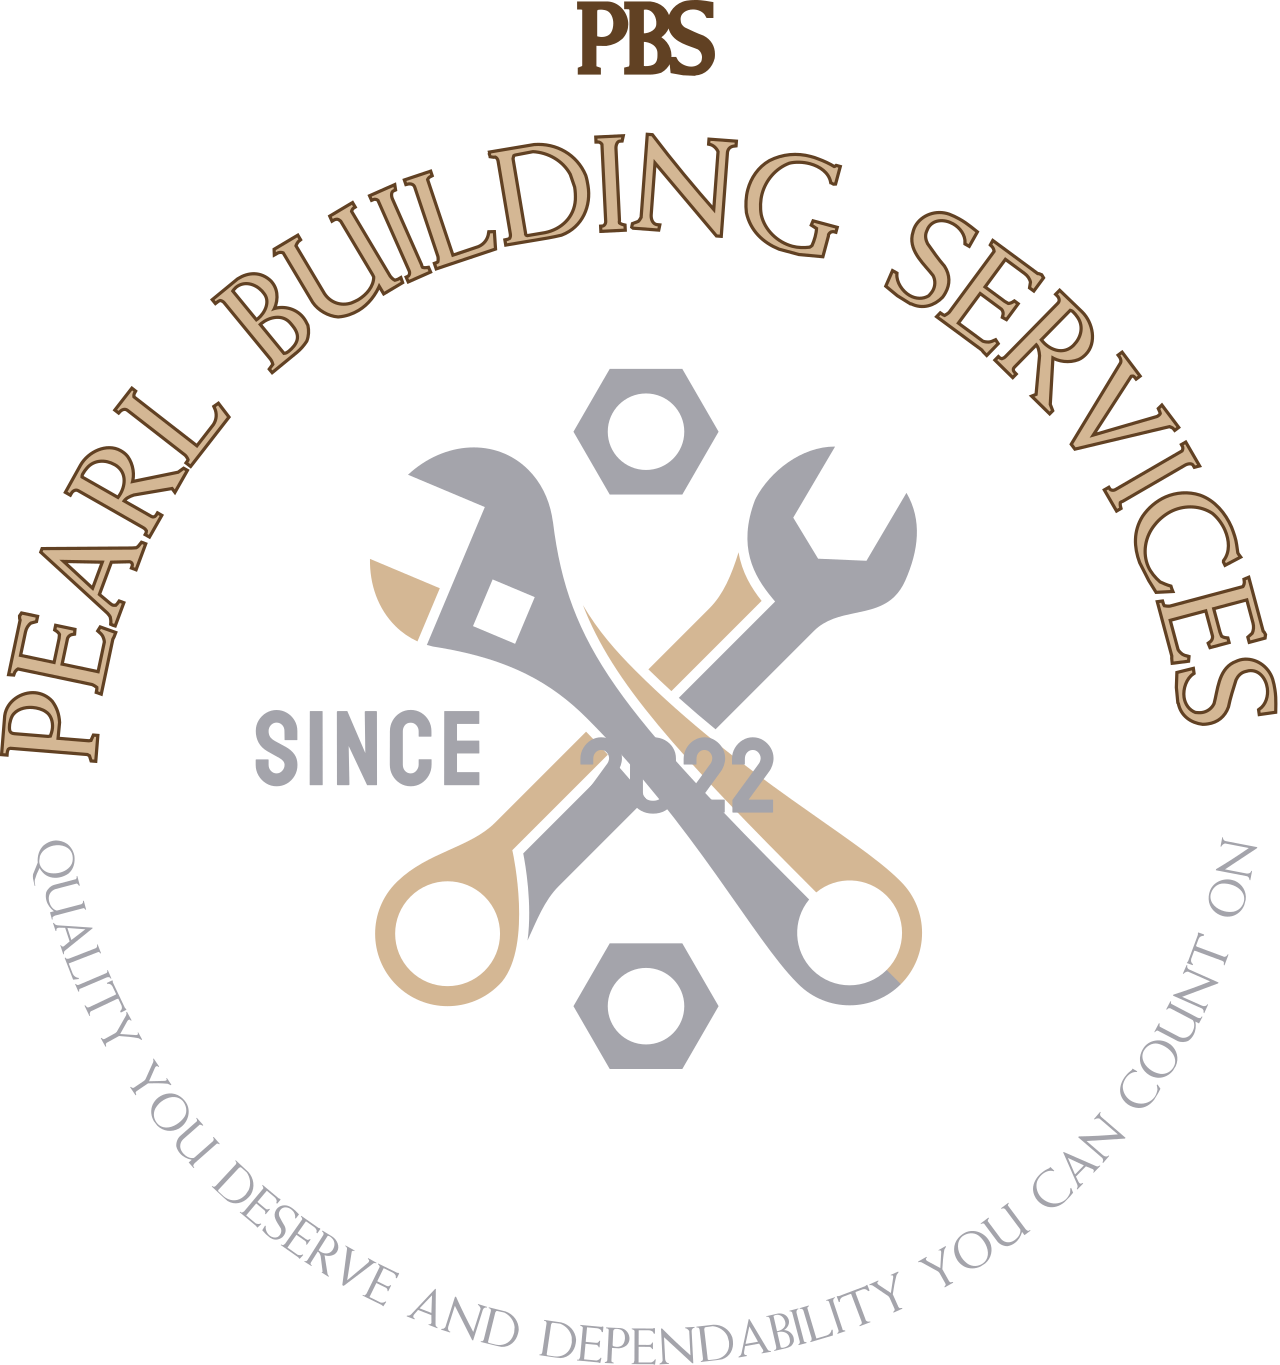 PEARL BUILDING SERVICES 's web page